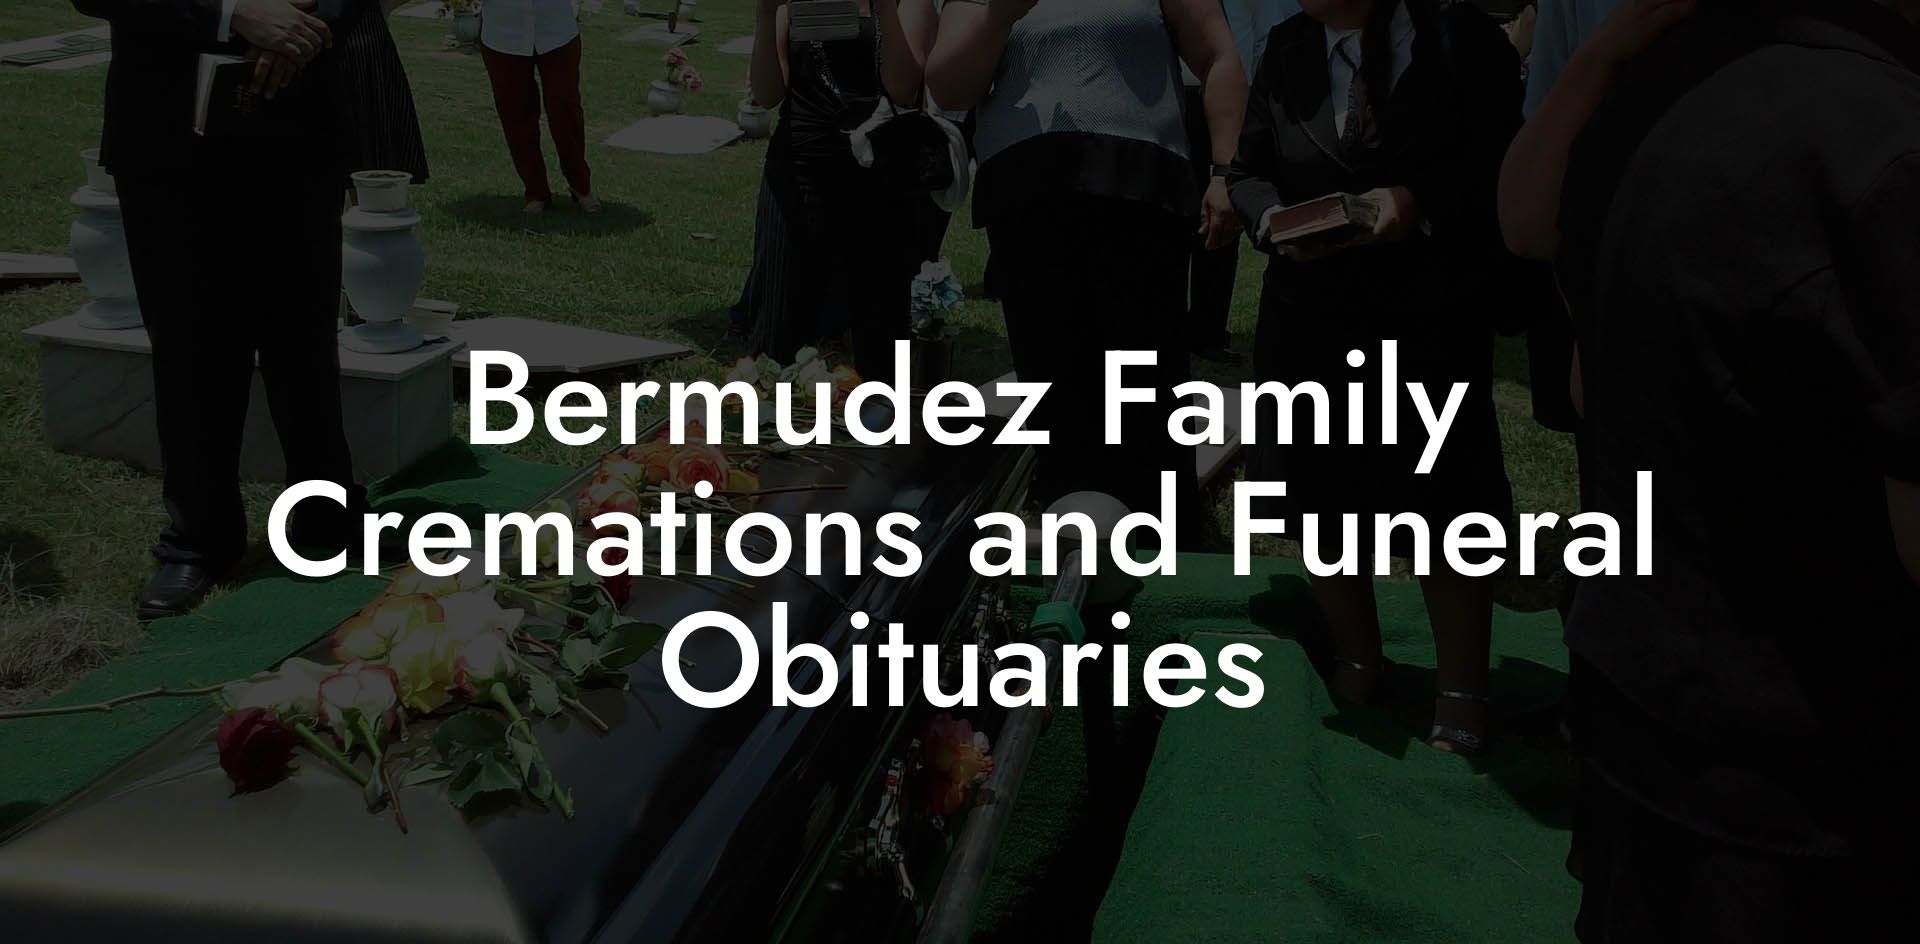 Bermudez Family Cremations and Funeral Obituaries